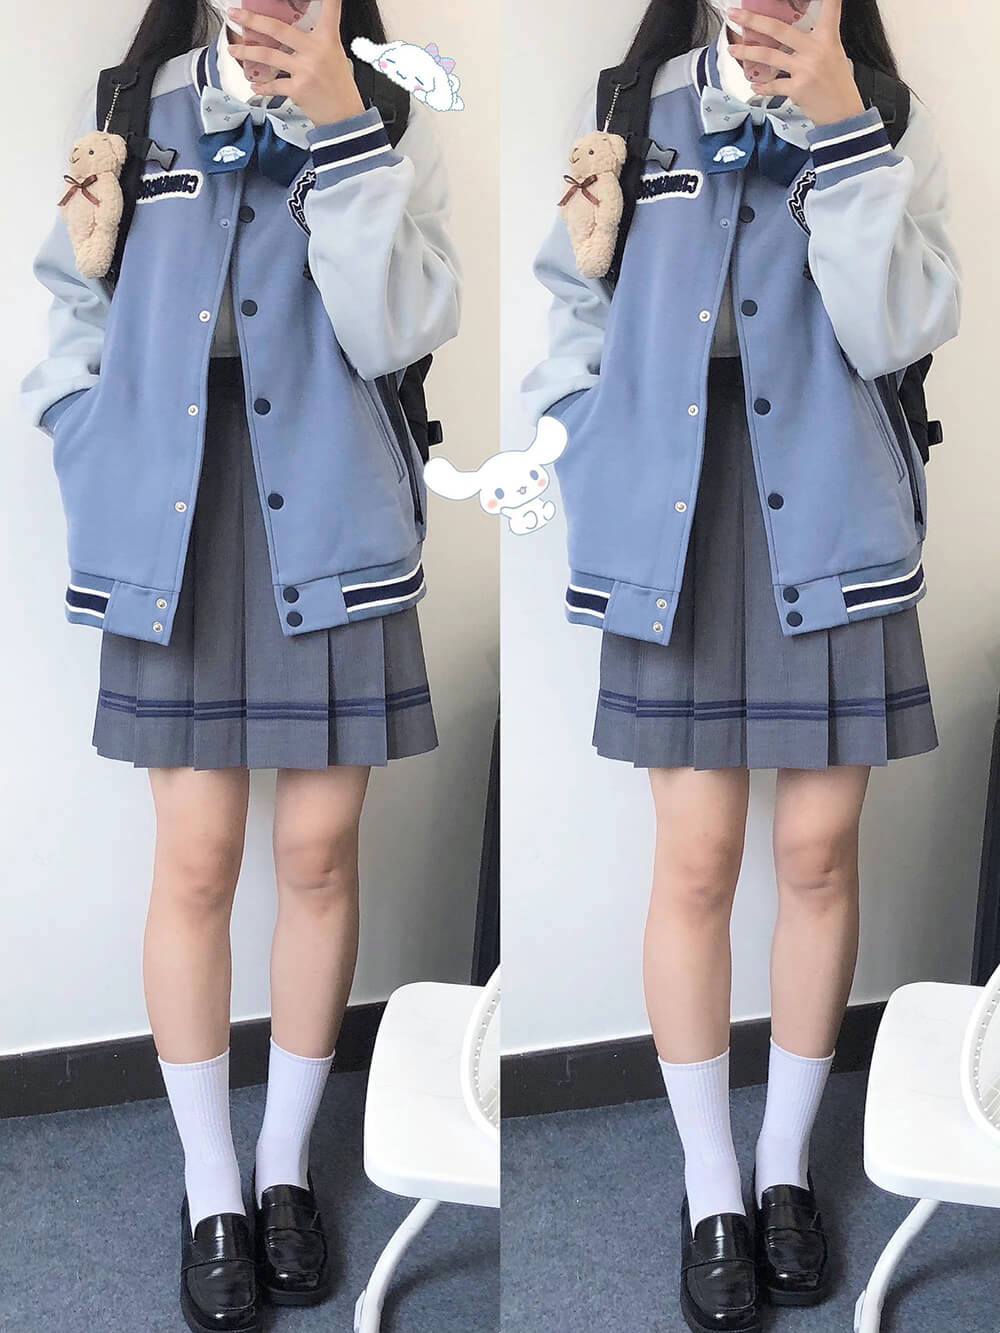 jk-outfit-styled-by-the-cinnamoroll-patchwork-striped-varsity-jacket-blue